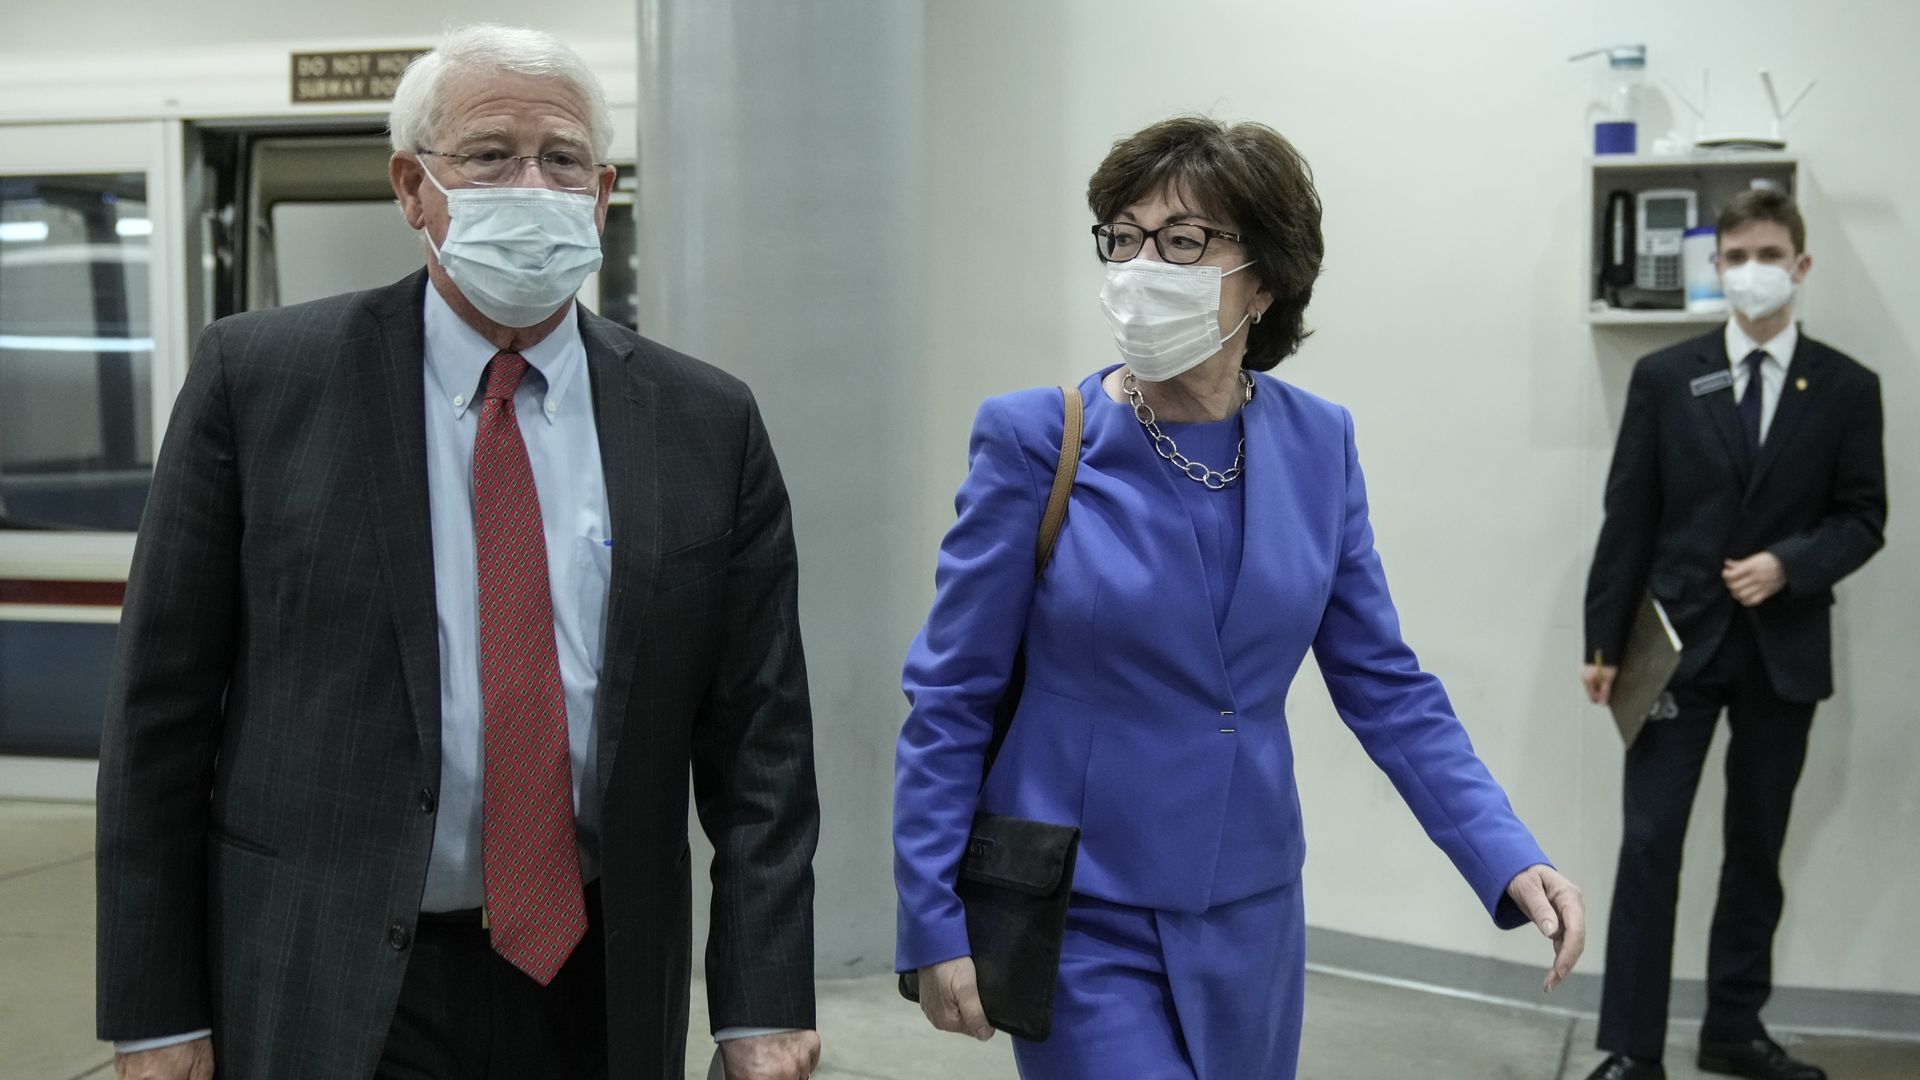 Sen. Susan Collins is seen walking into the Capitol on Wednesday.